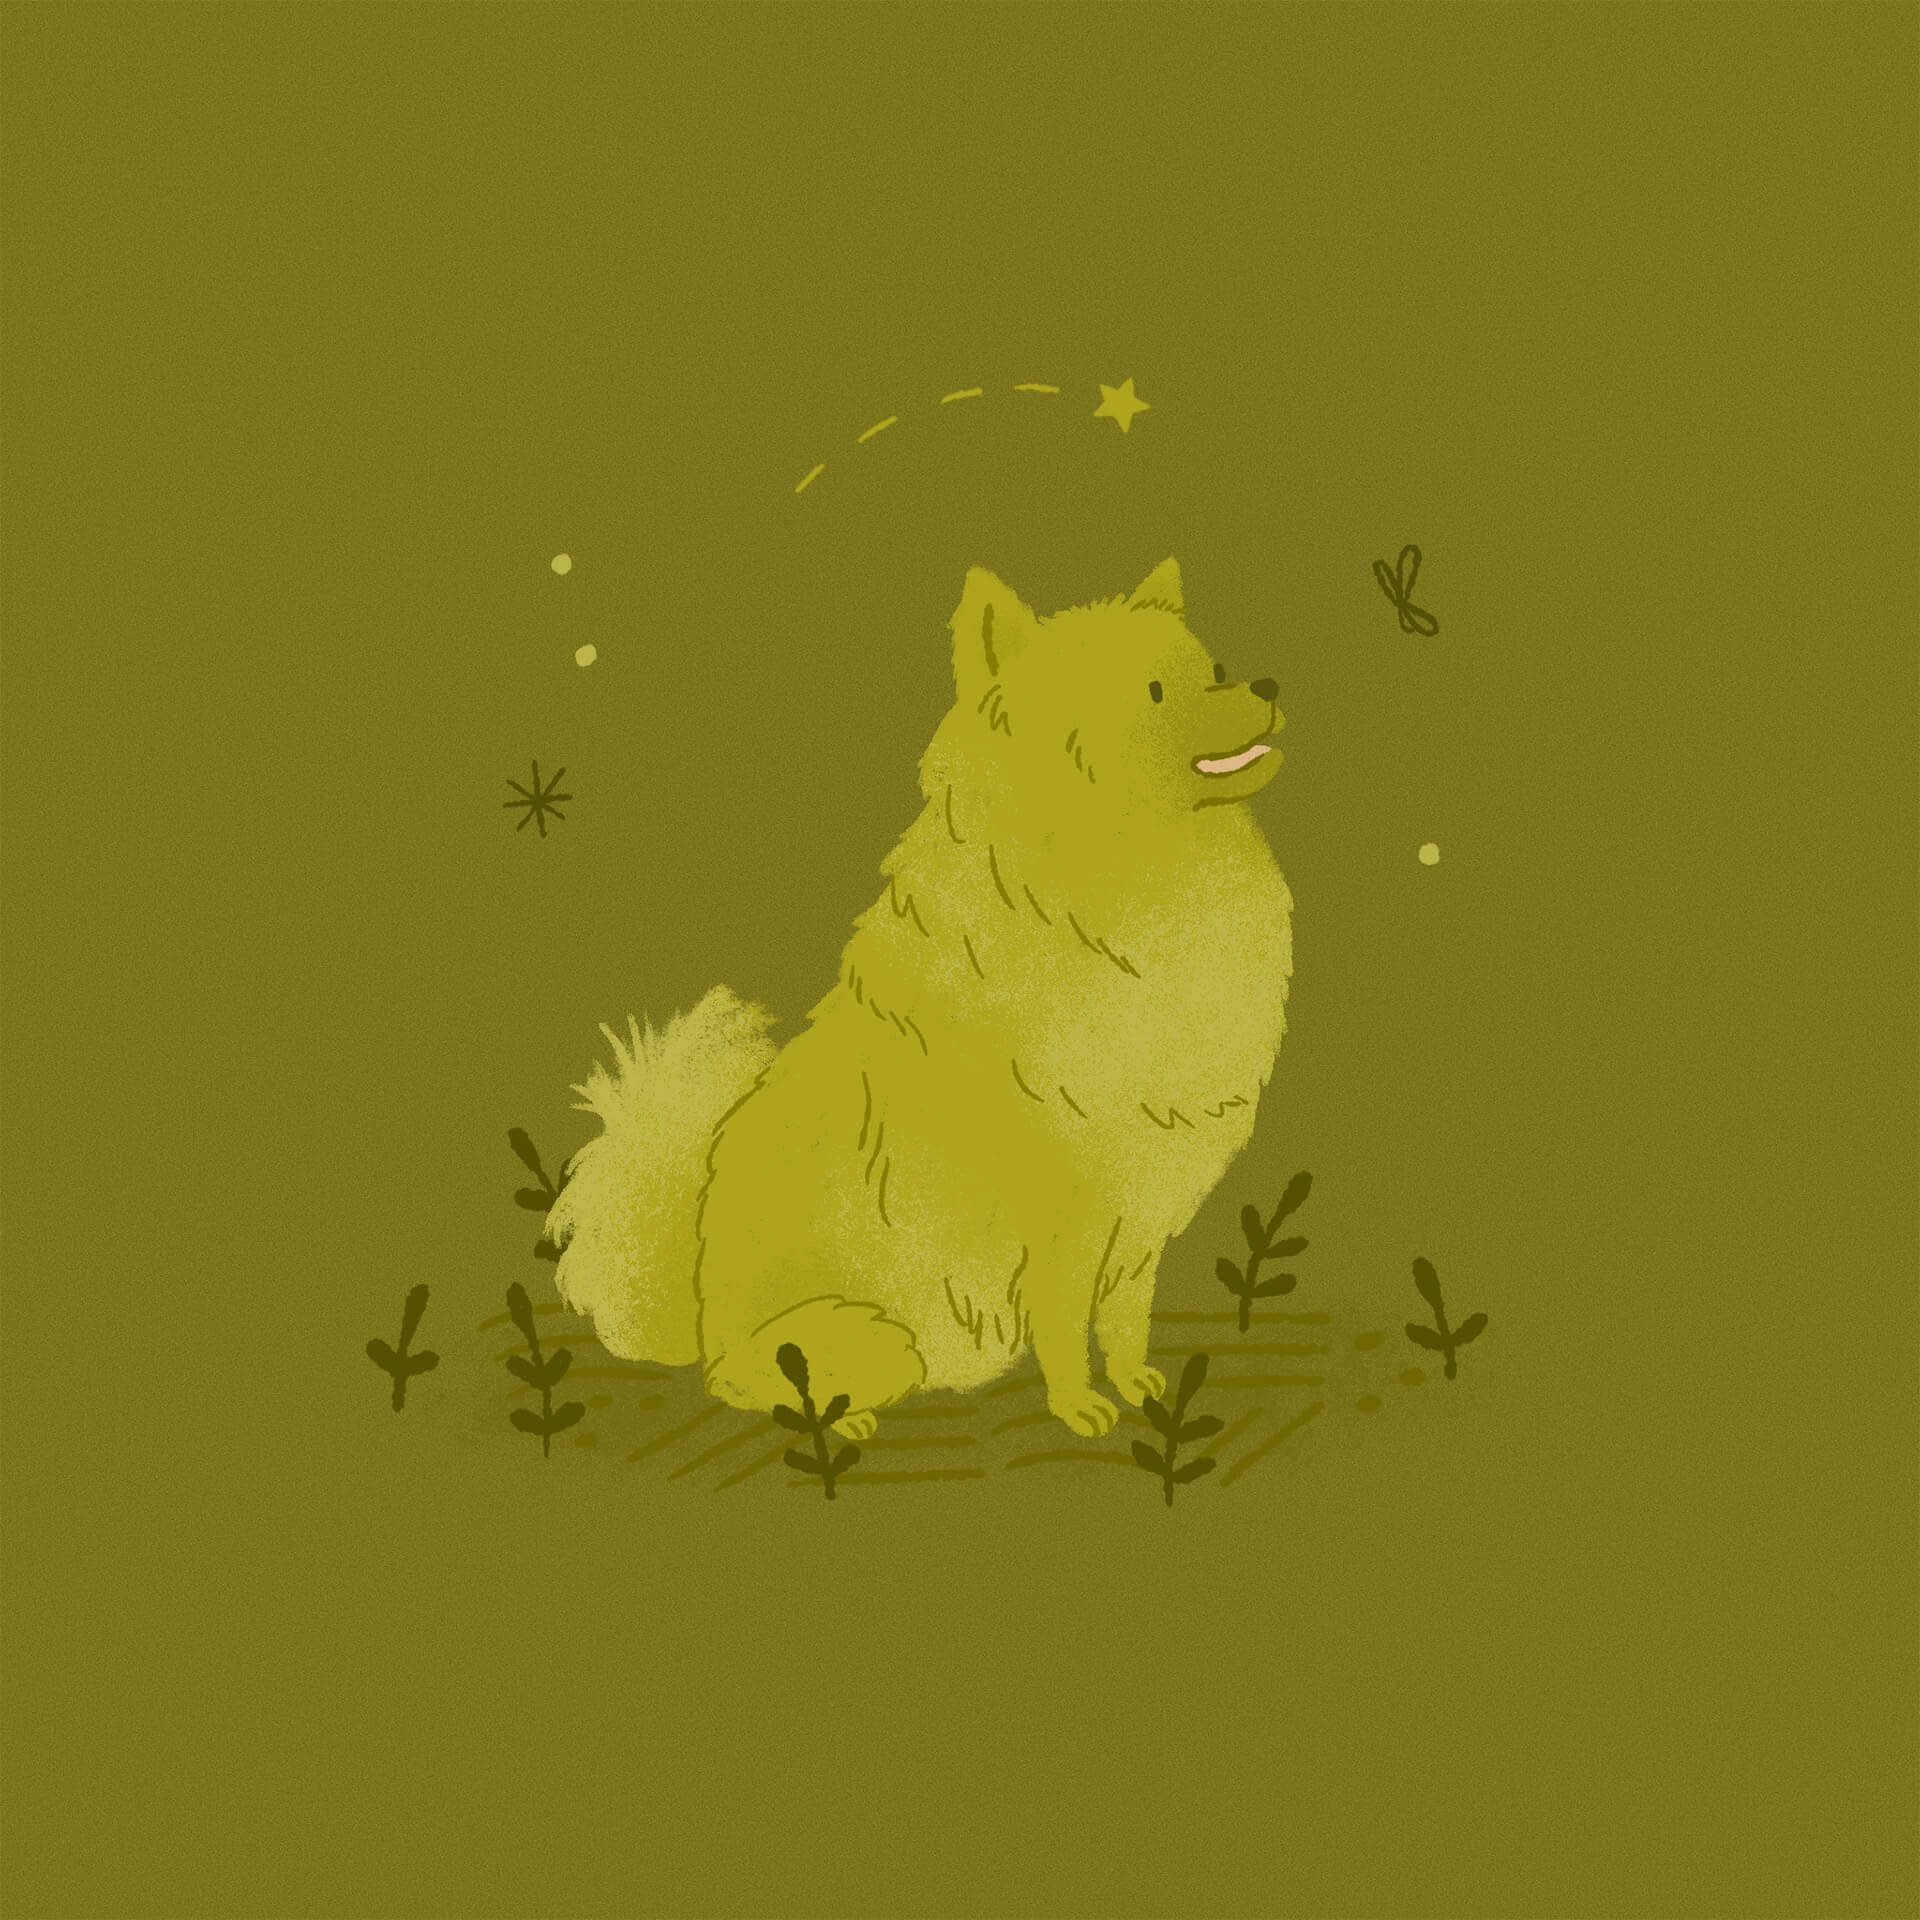 An illustration of a green Mittelspitz dog sitting in the grass